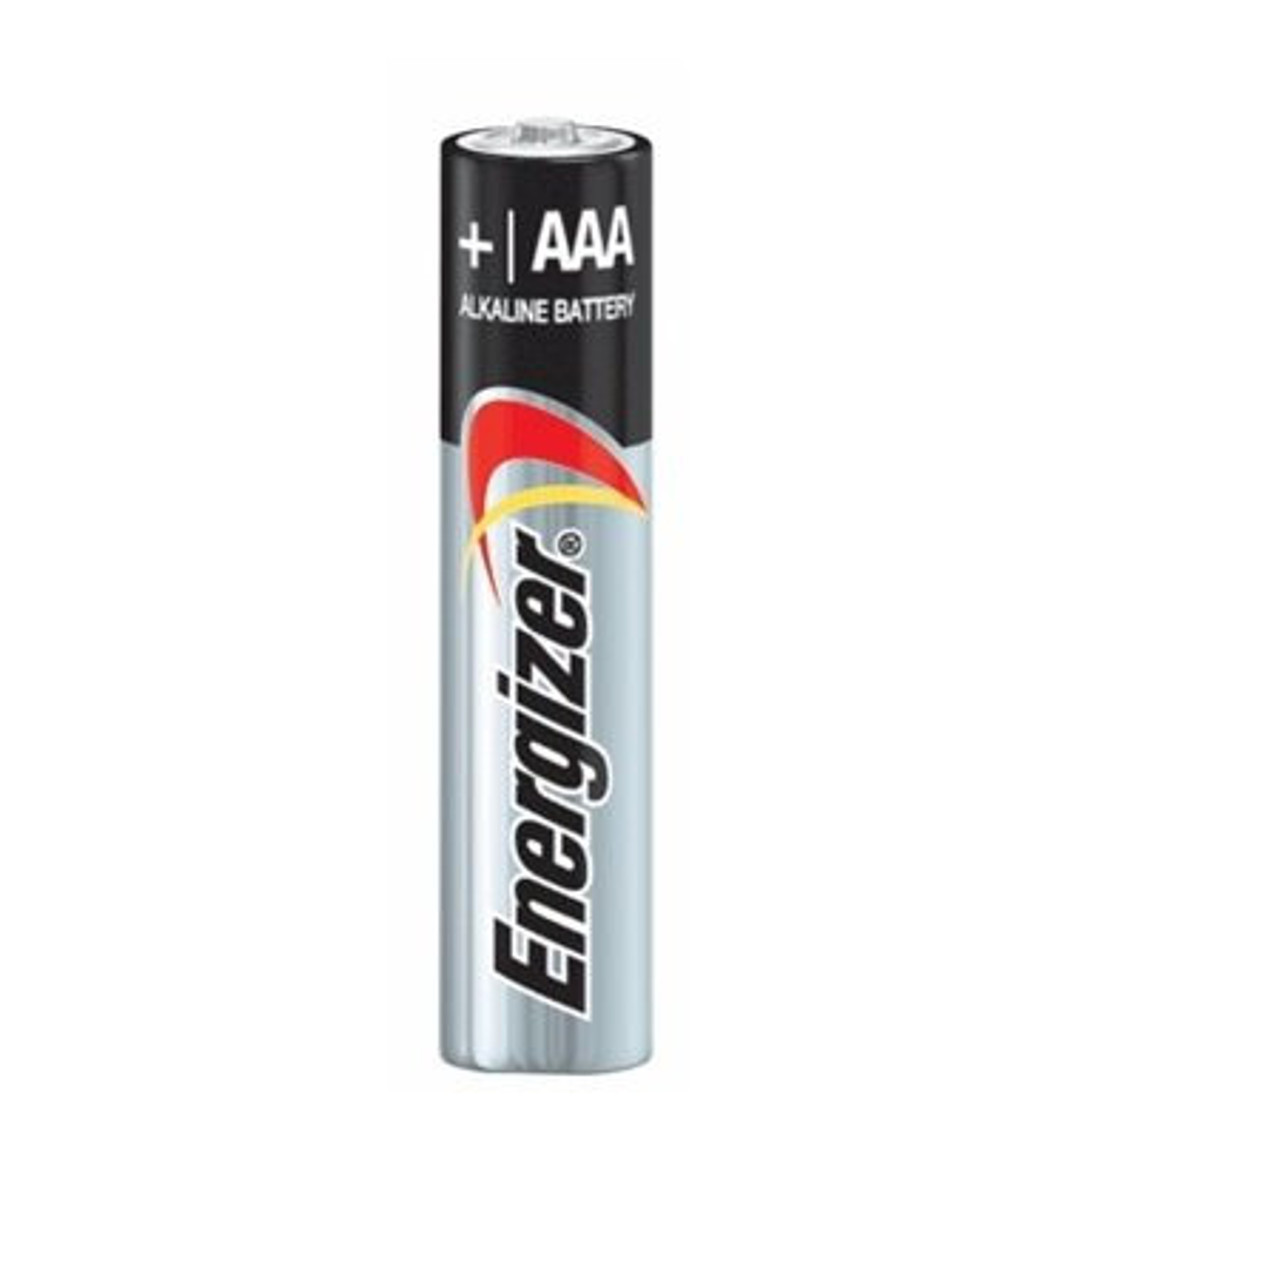 Energizer Max Alkaline AAA Battery E92 1.5V - 150 Pack FREE SHIPPING